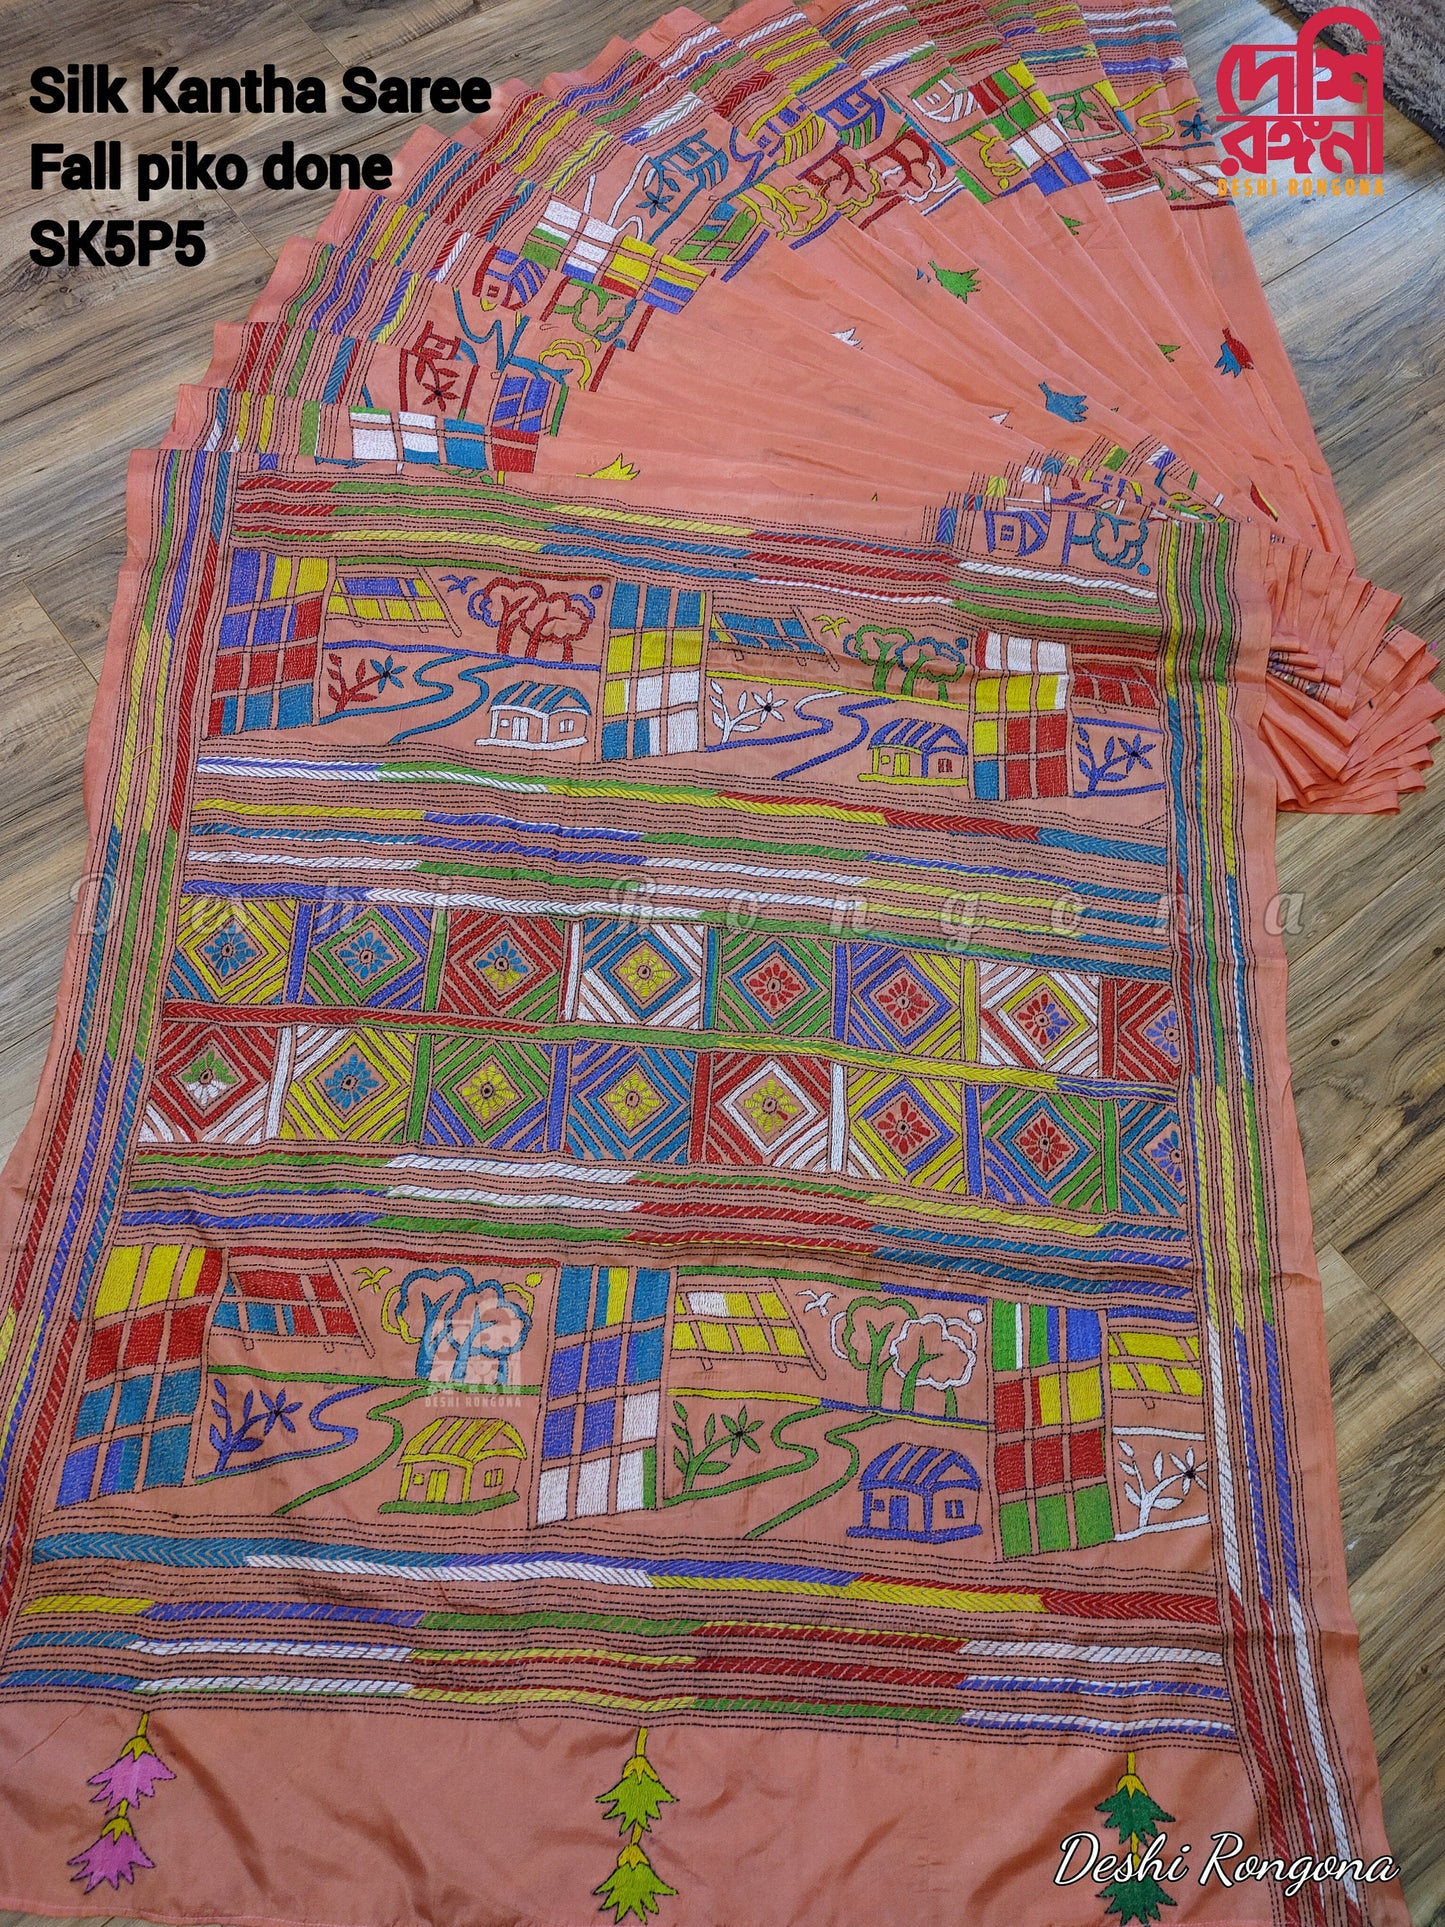 Extraordinary Hand Stiched Kantha Saree, Peach color Pure Bangalore Silk with Multi color Kantha Works, Elegant,Classy Saree, Fall piko done